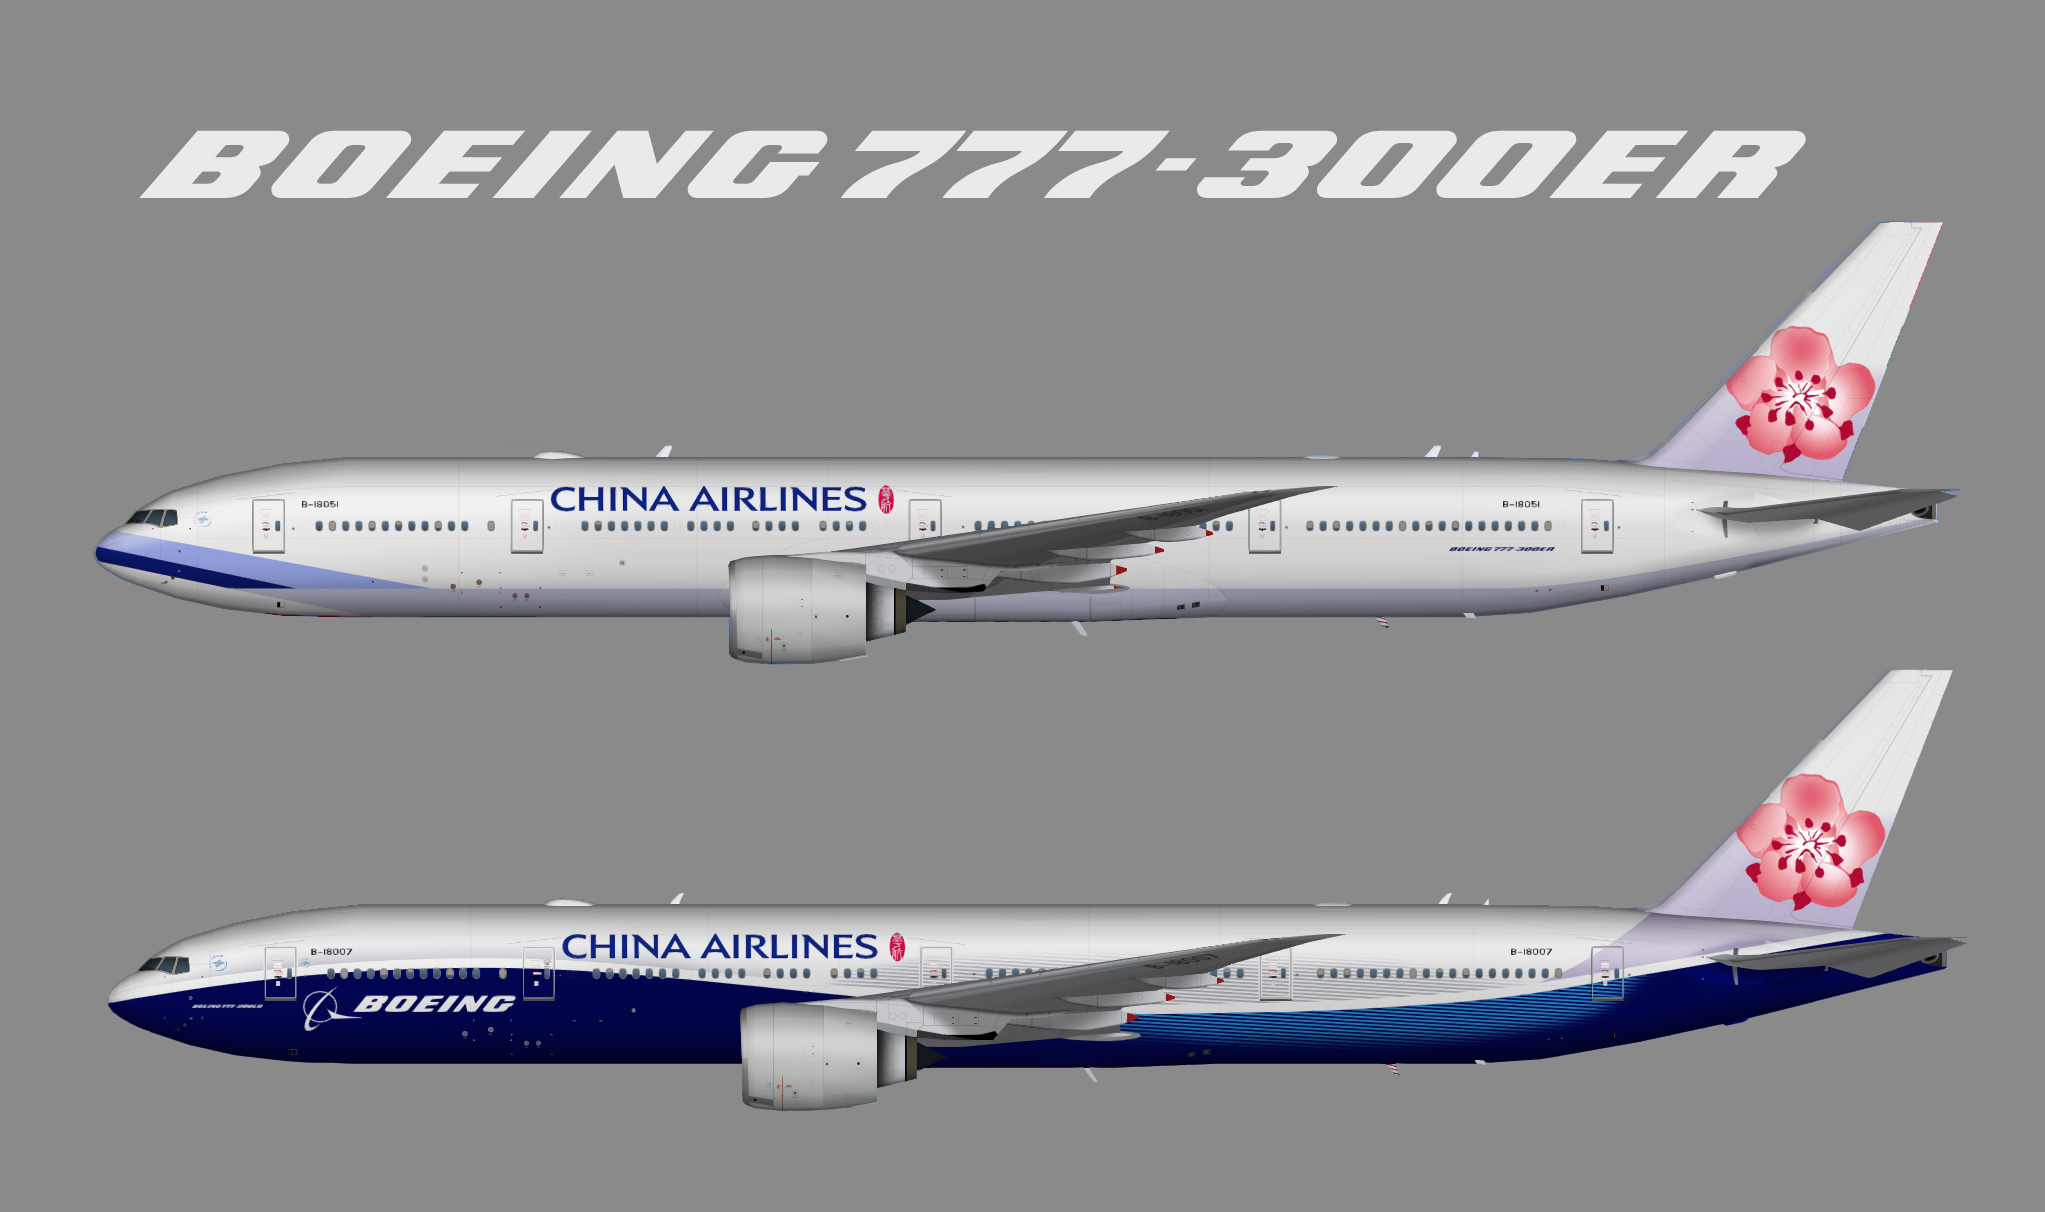 China Airlines Boeing 777-300ER